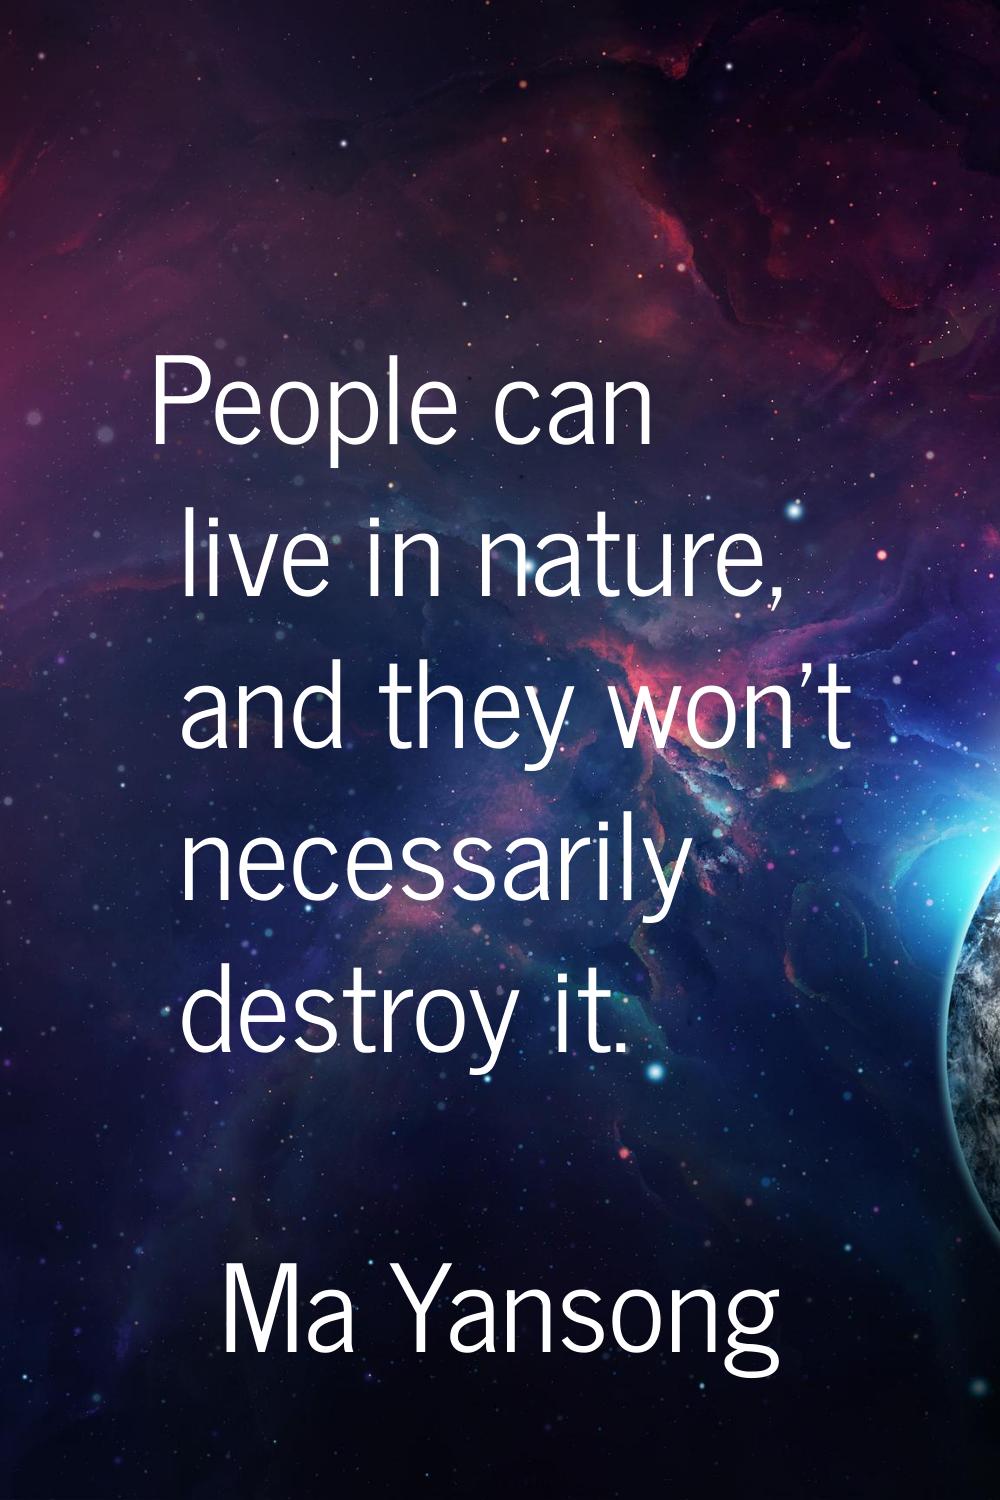 People can live in nature, and they won't necessarily destroy it.